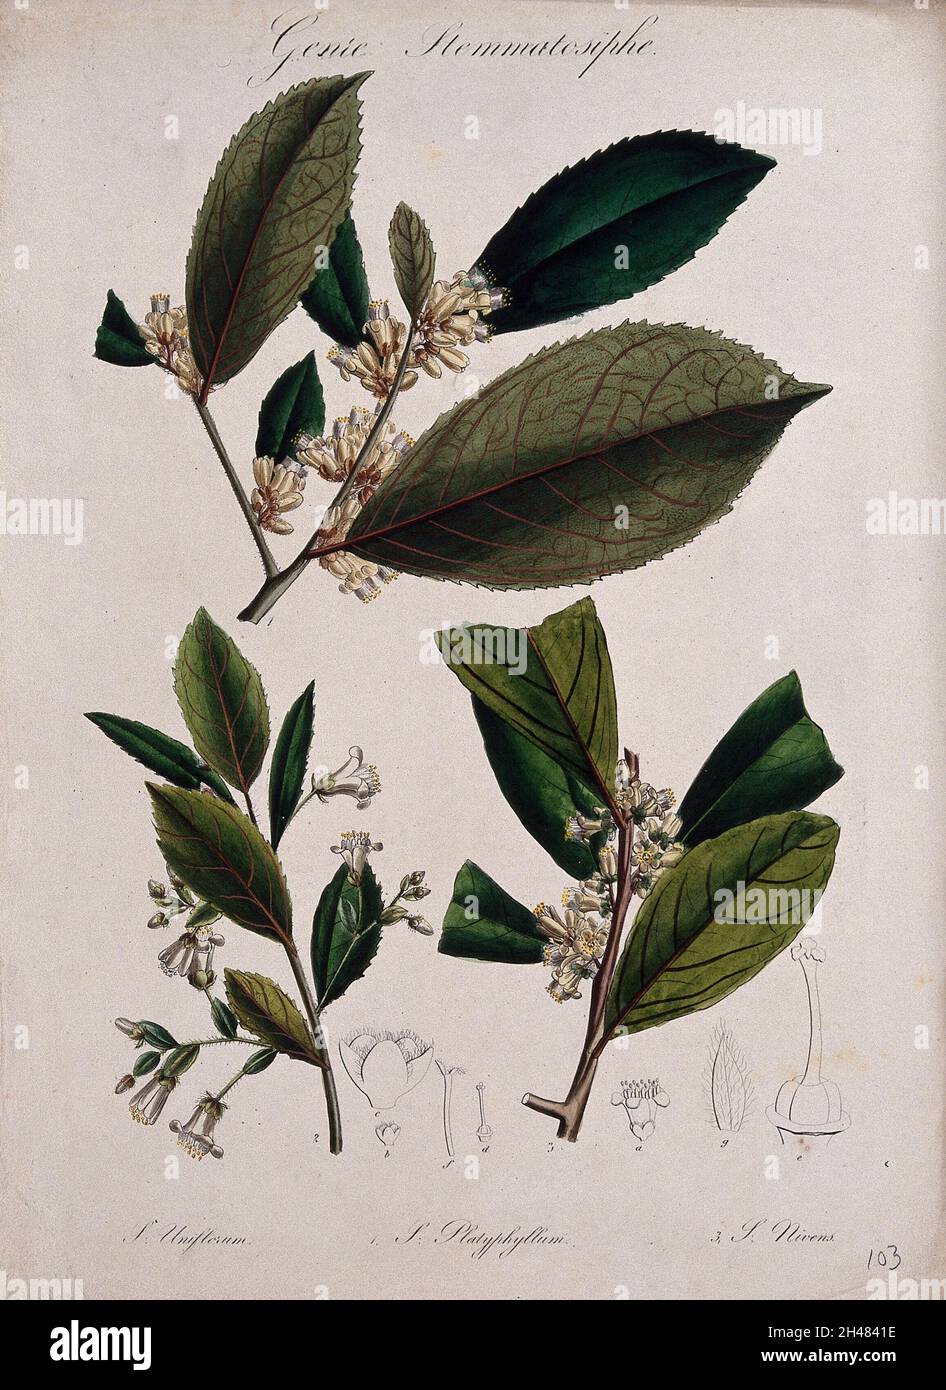 Five plants, all species of the genus Symplocos: flowering stems and floral segments. Coloured lithograph. Stock Photo